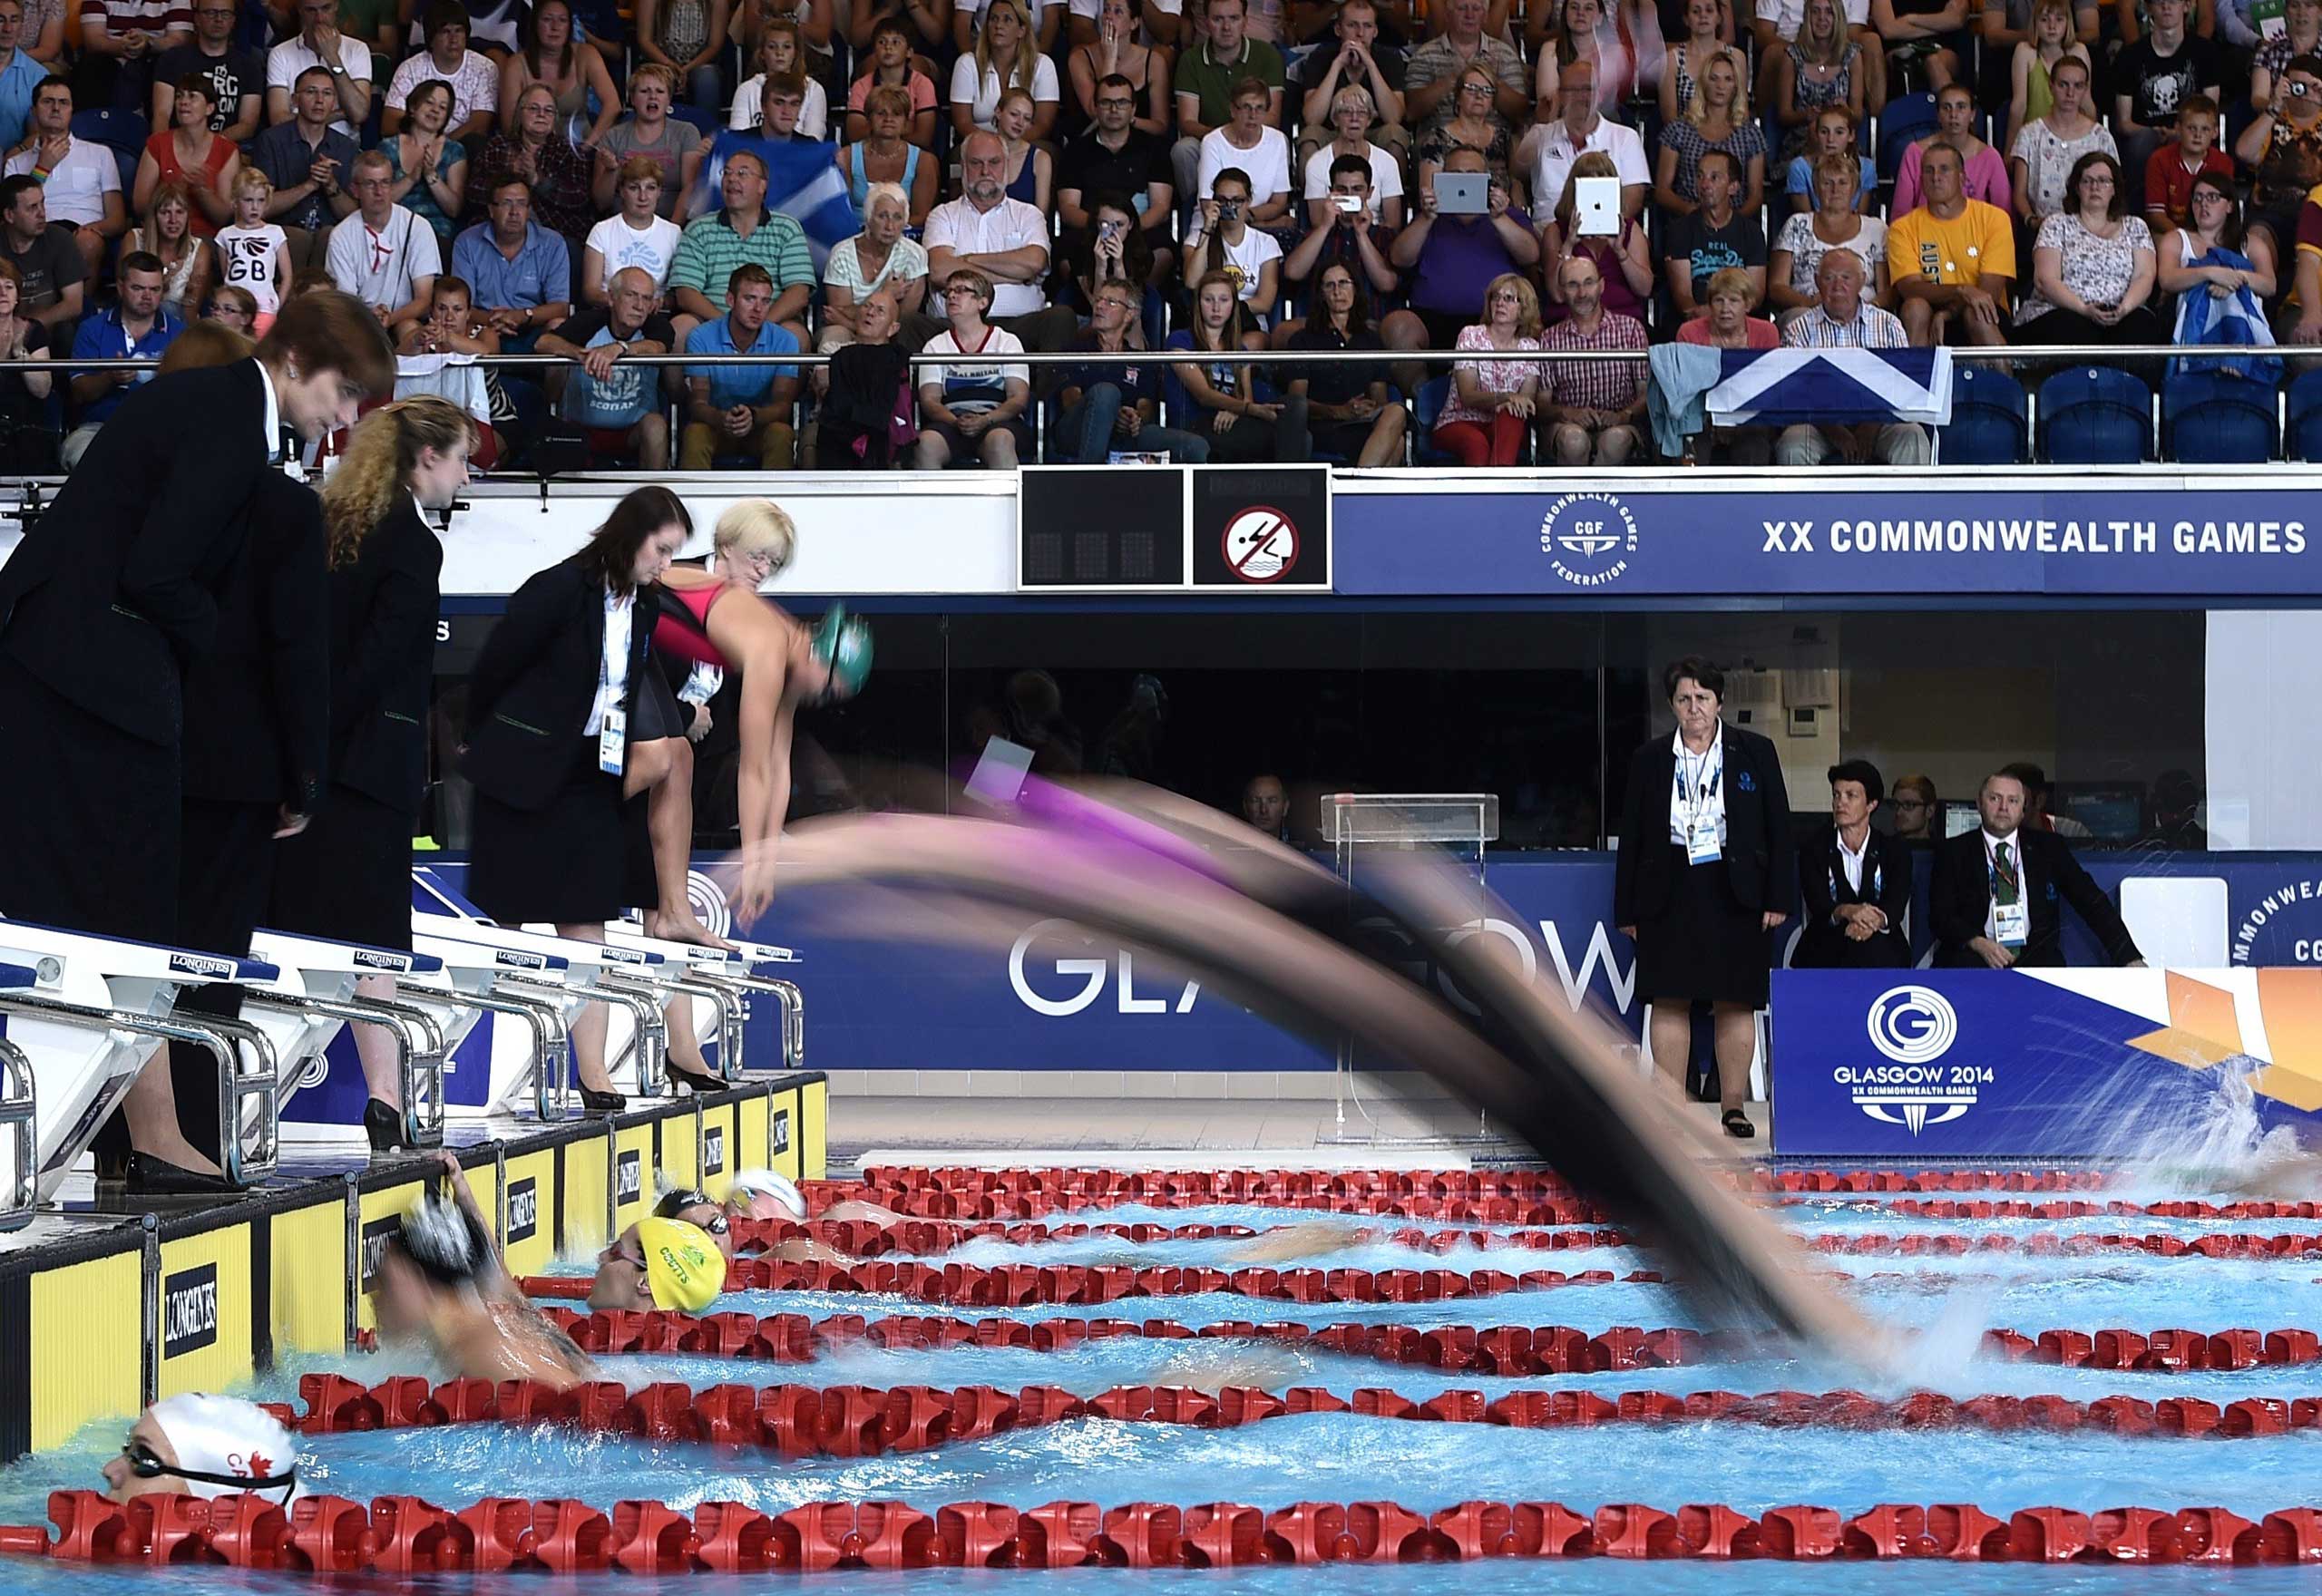 Swimmers dive in during the Women's 4 x 200m Freestyle Relay Final at the Tollcross International Swimming Centre during the 2014 Commonwealth Games in Glasgow on July 26, 2014.